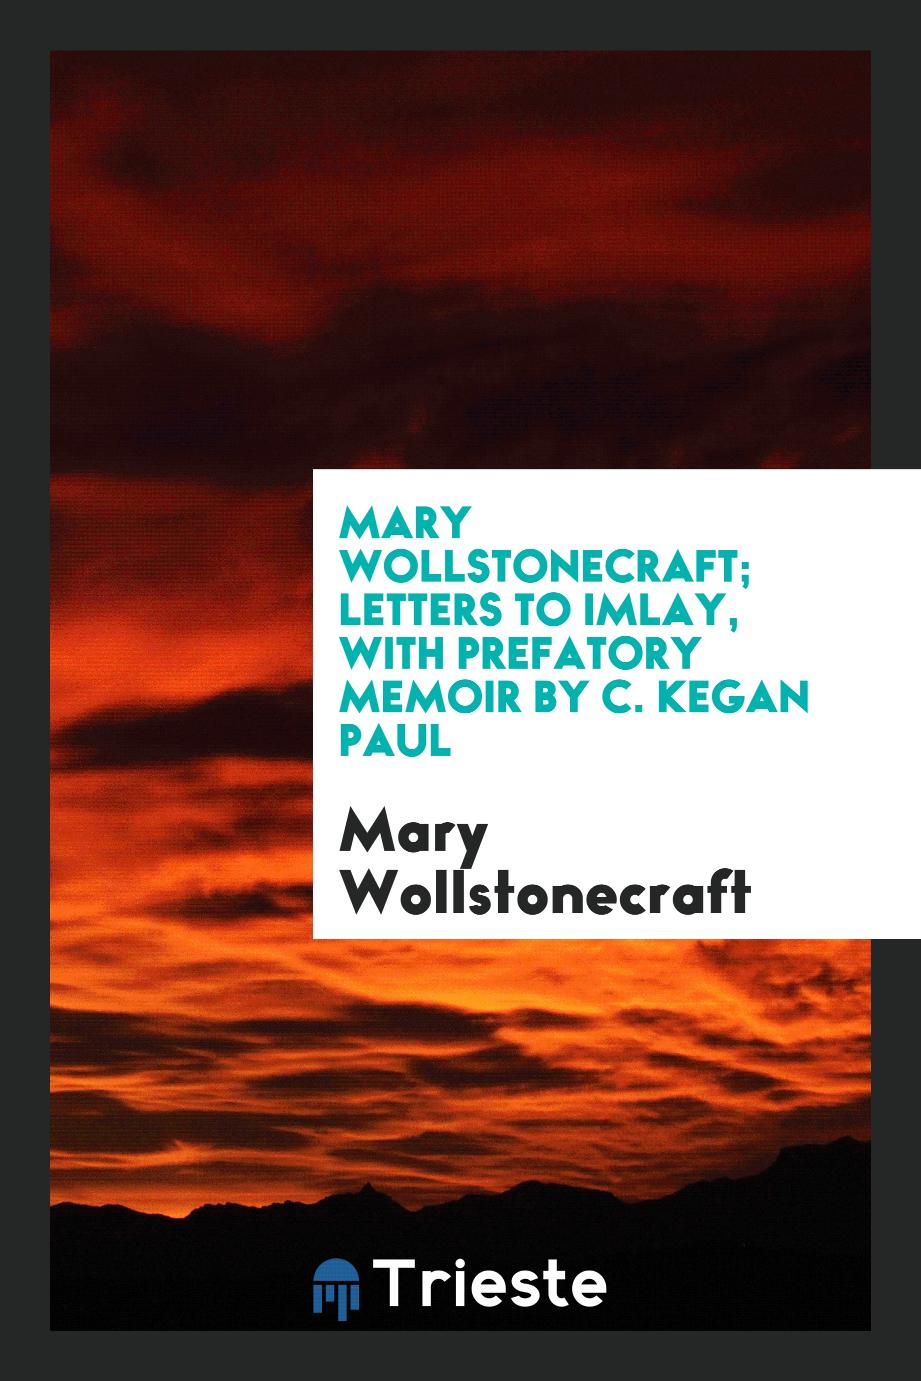 Mary Wollstonecraft; Letters to Imlay, with prefatory memoir by C. Kegan Paul